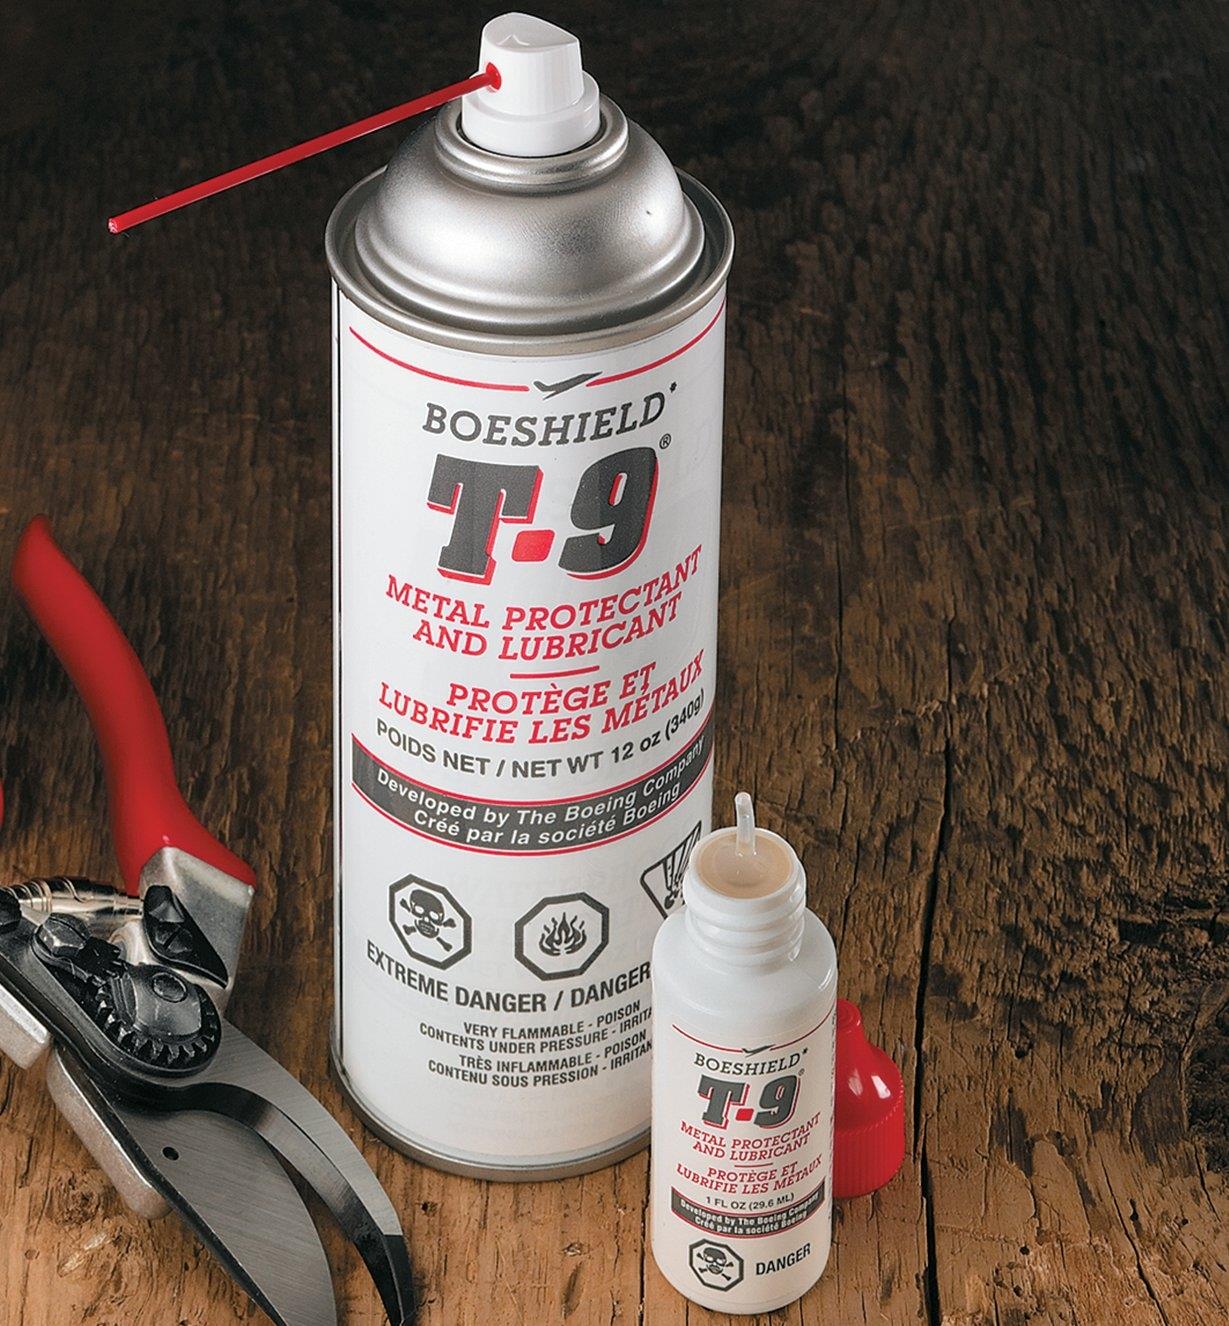 Boeshield T-9 Protectant and Lubricant next to a pair of pruners